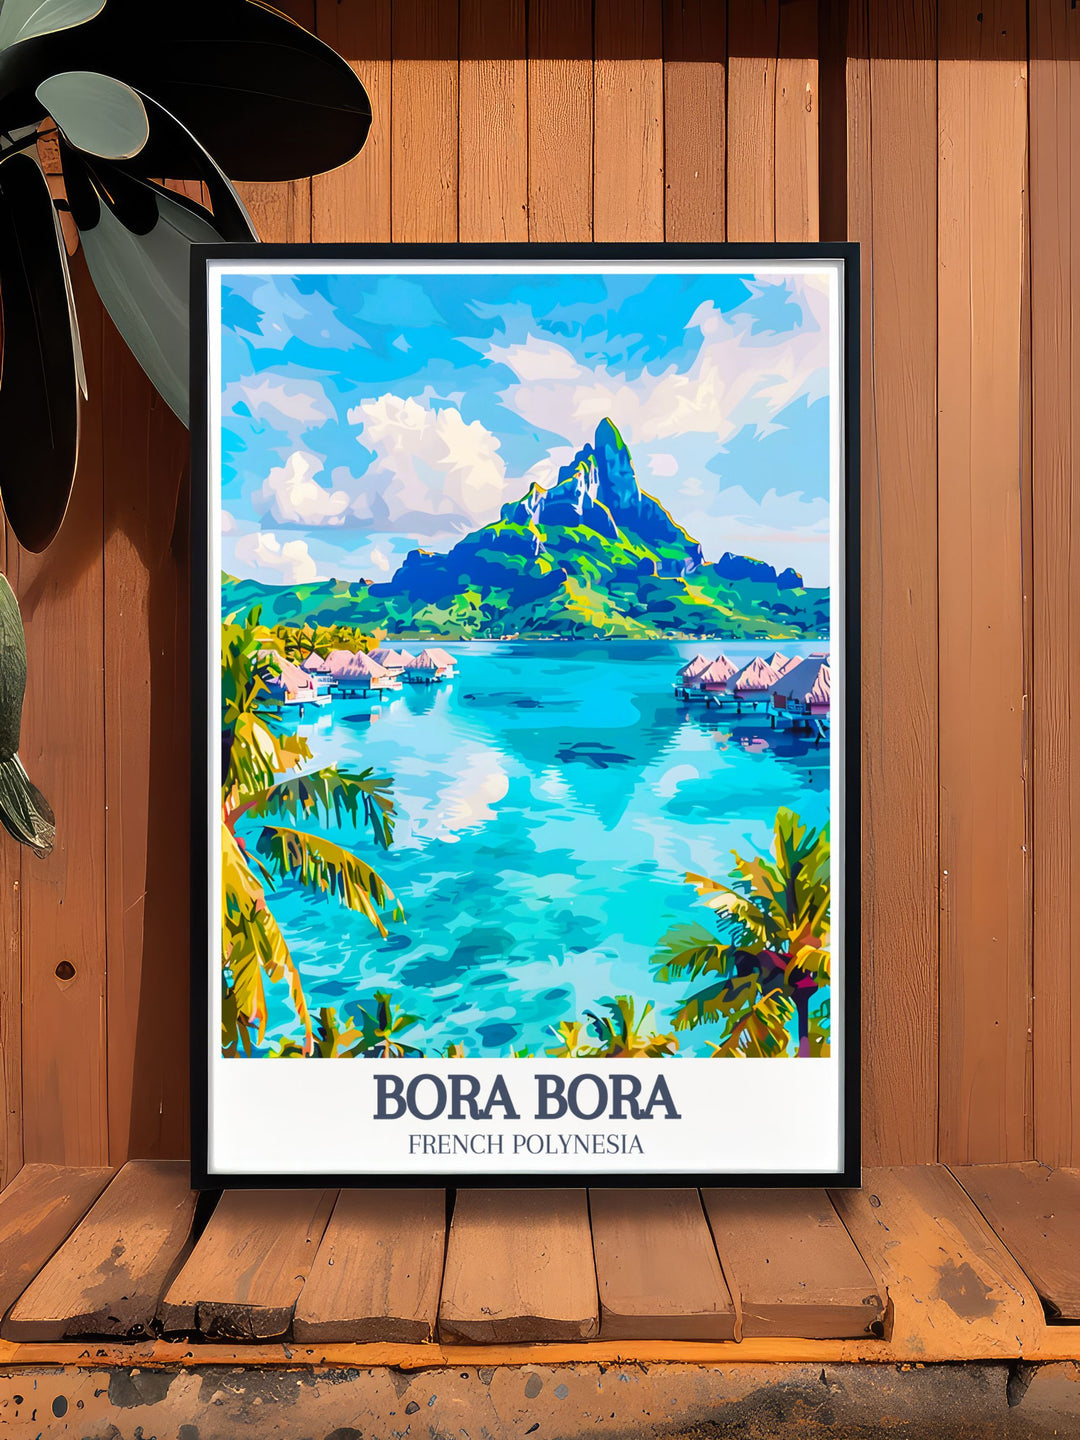 Enchanting Mount Otemanu Bora Bora Yacht Club travel poster featuring the majestic mountain and lively yacht club of French Polynesia this artwork is ideal for adding a touch of elegance and natural beauty to any home decor collection.